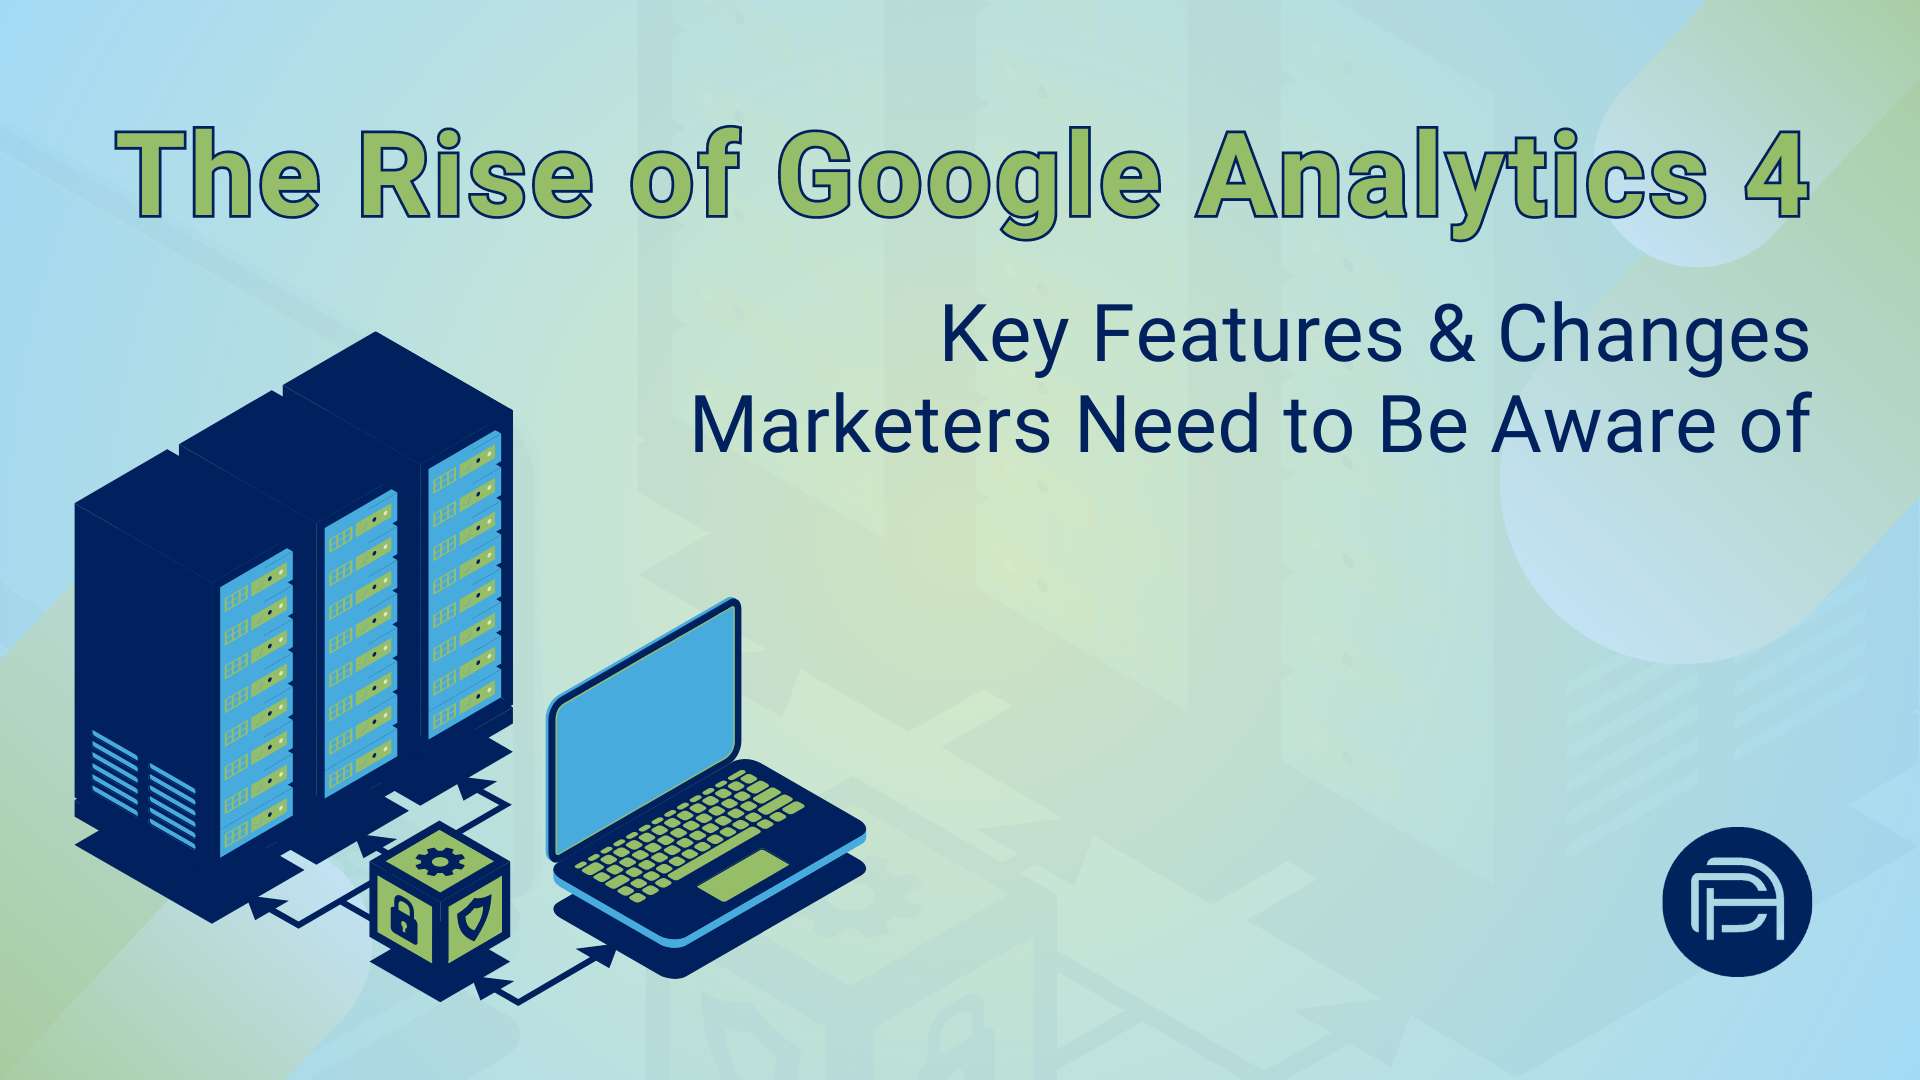 The Rise Of Google Analytics 4: Key Features & Changes Marketers Need To Be Aware Of